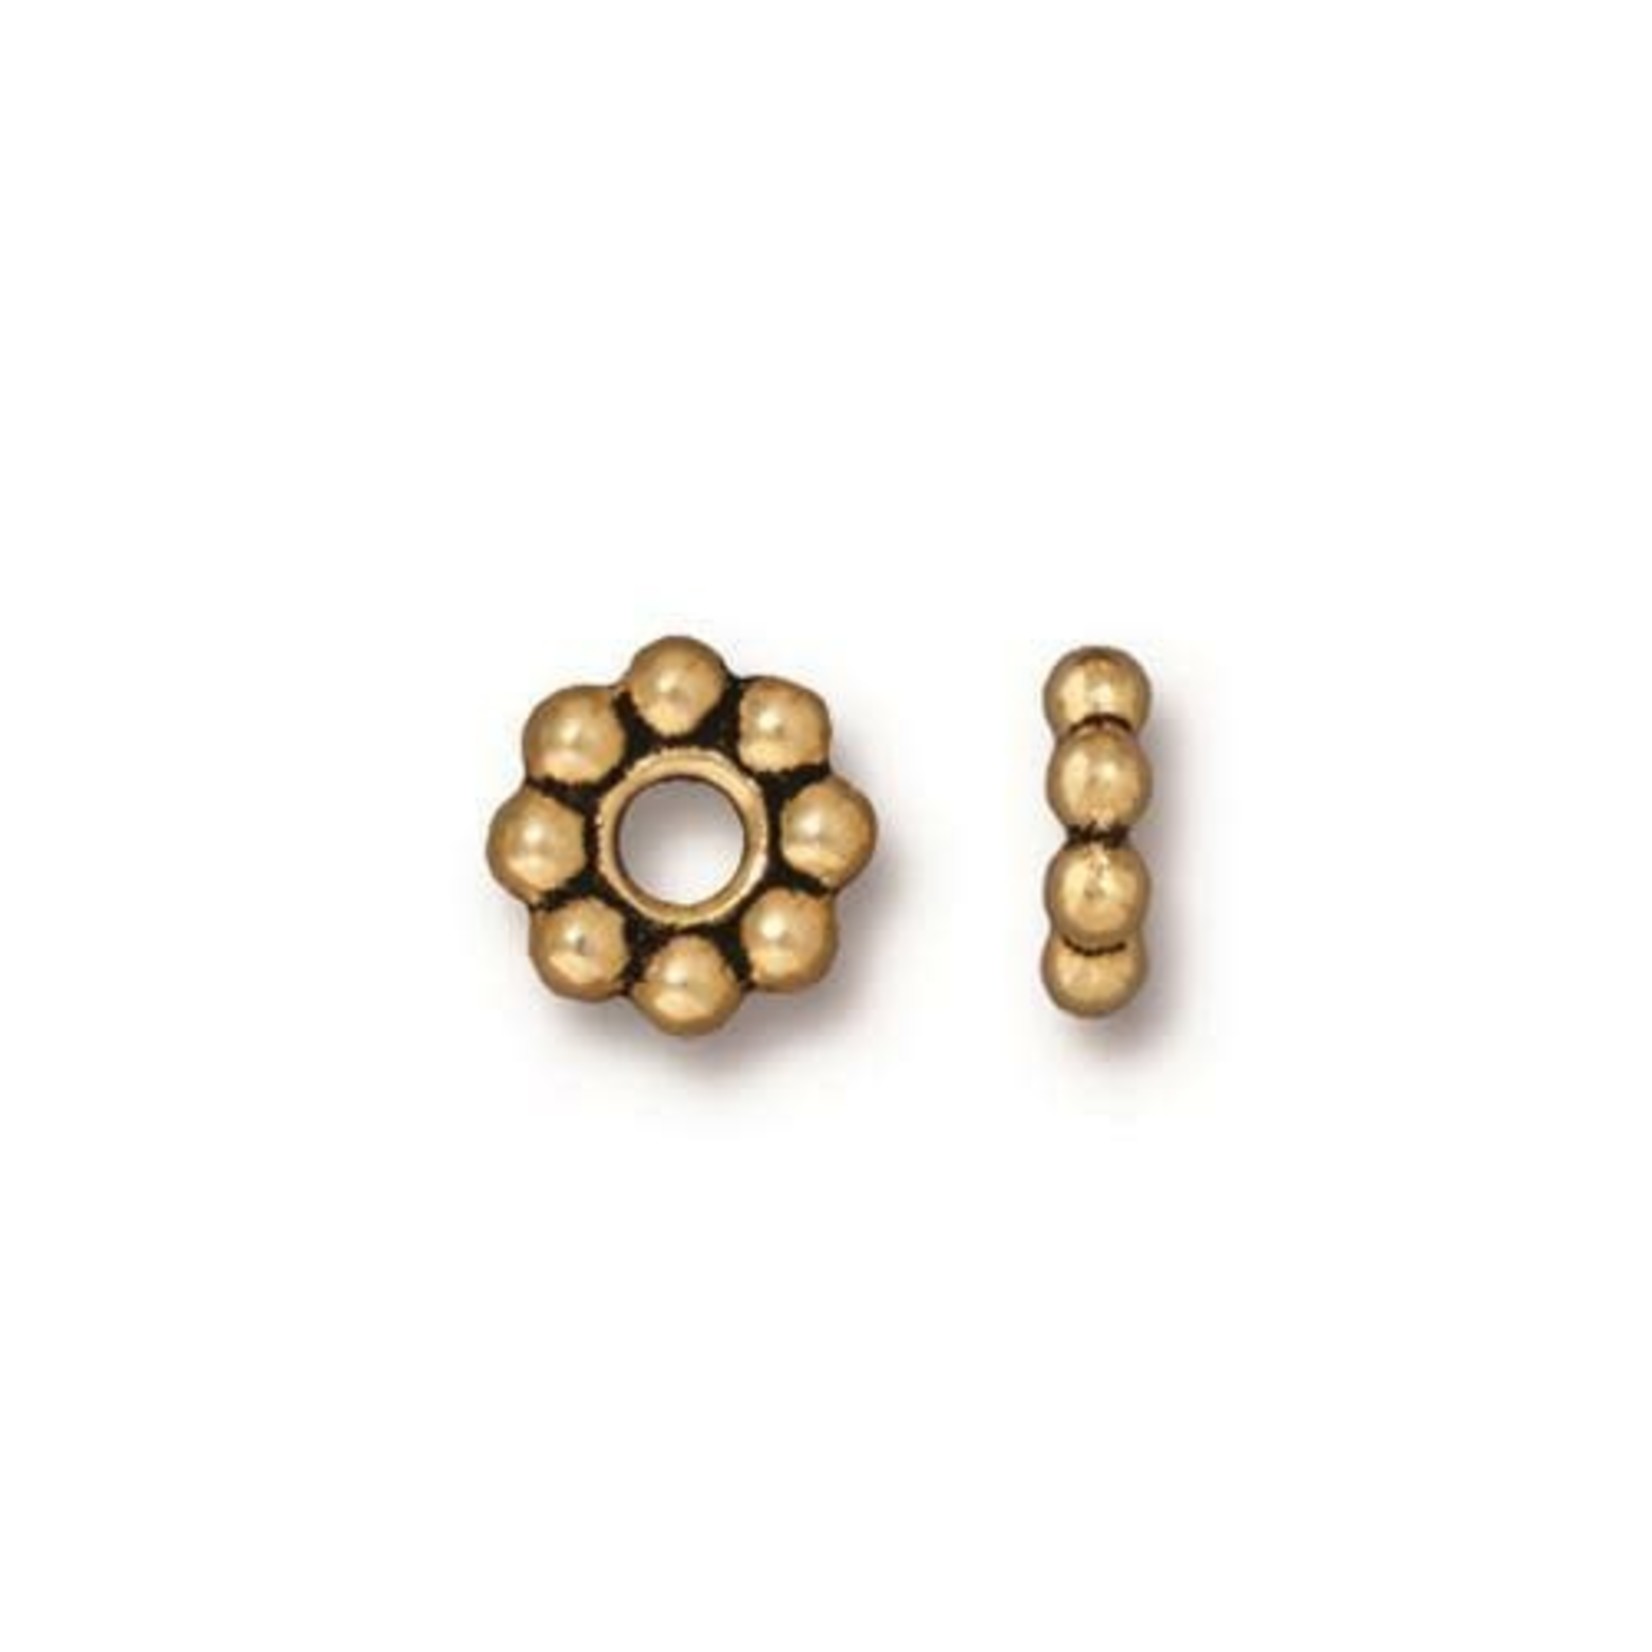 TierraCast Tierracast Antique Gold Plated 8mm Beaded Large Hole Bead